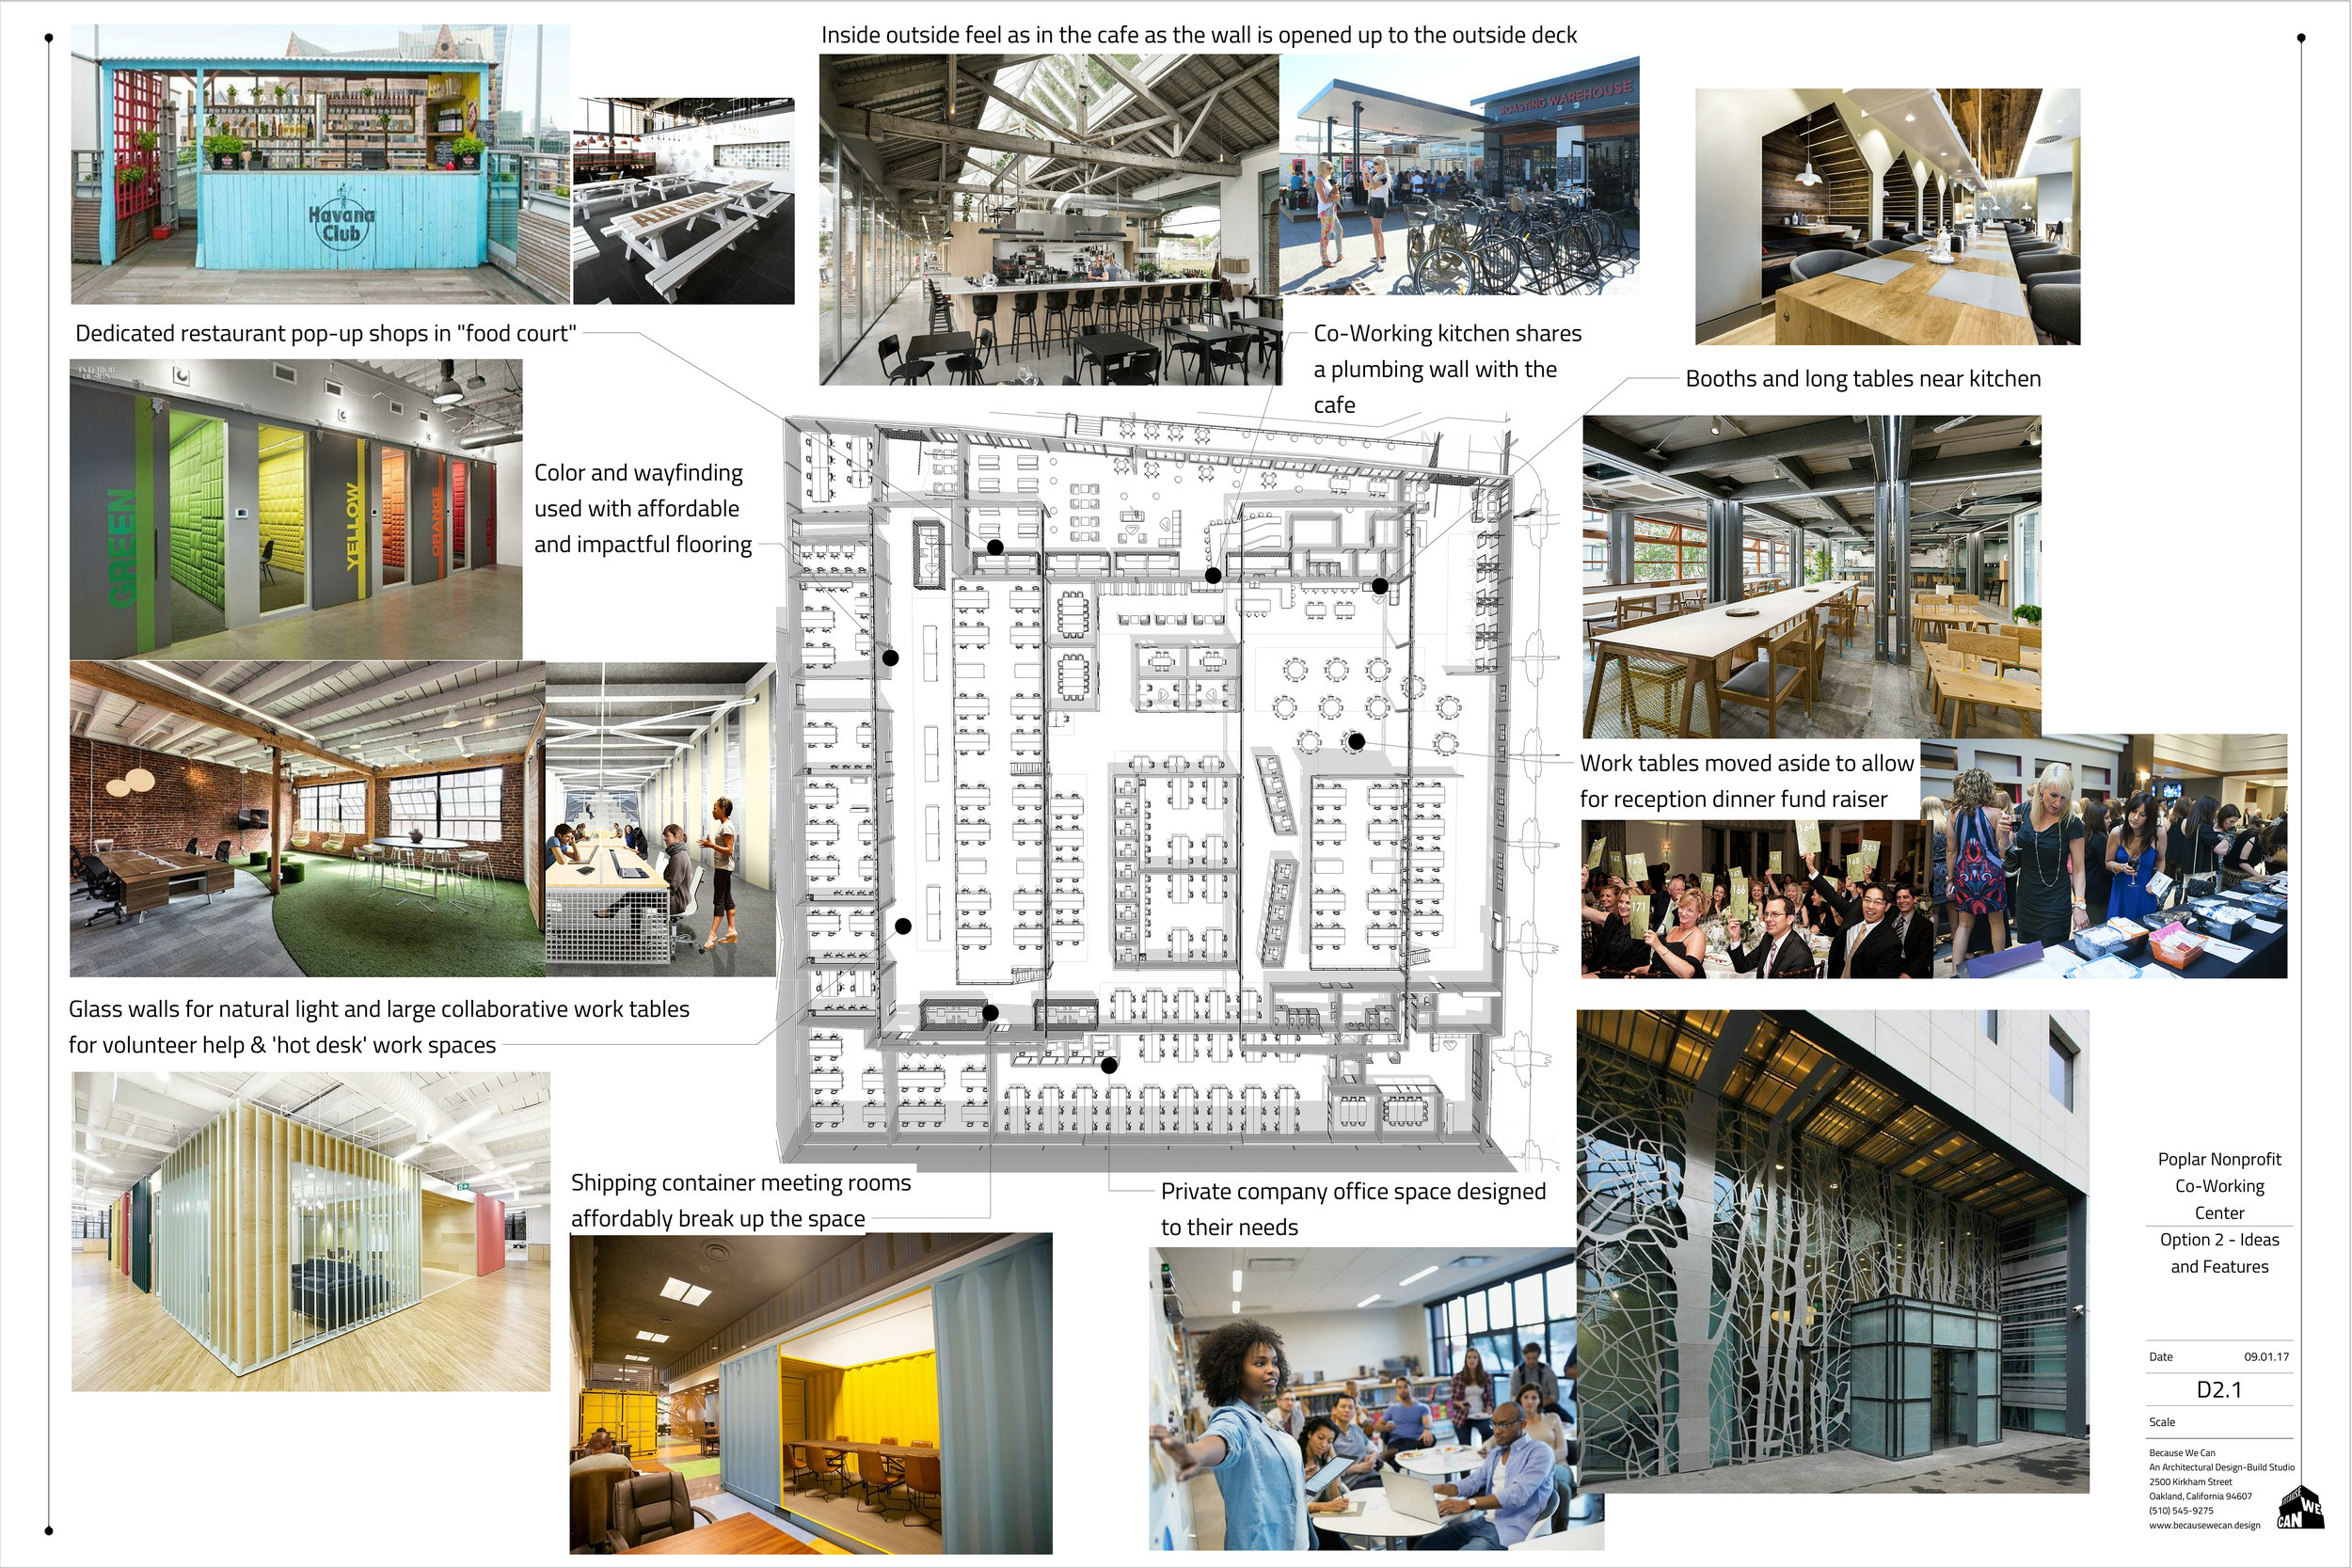  Floor plans and concept images to show a co-working office idea for this large industrial space. 